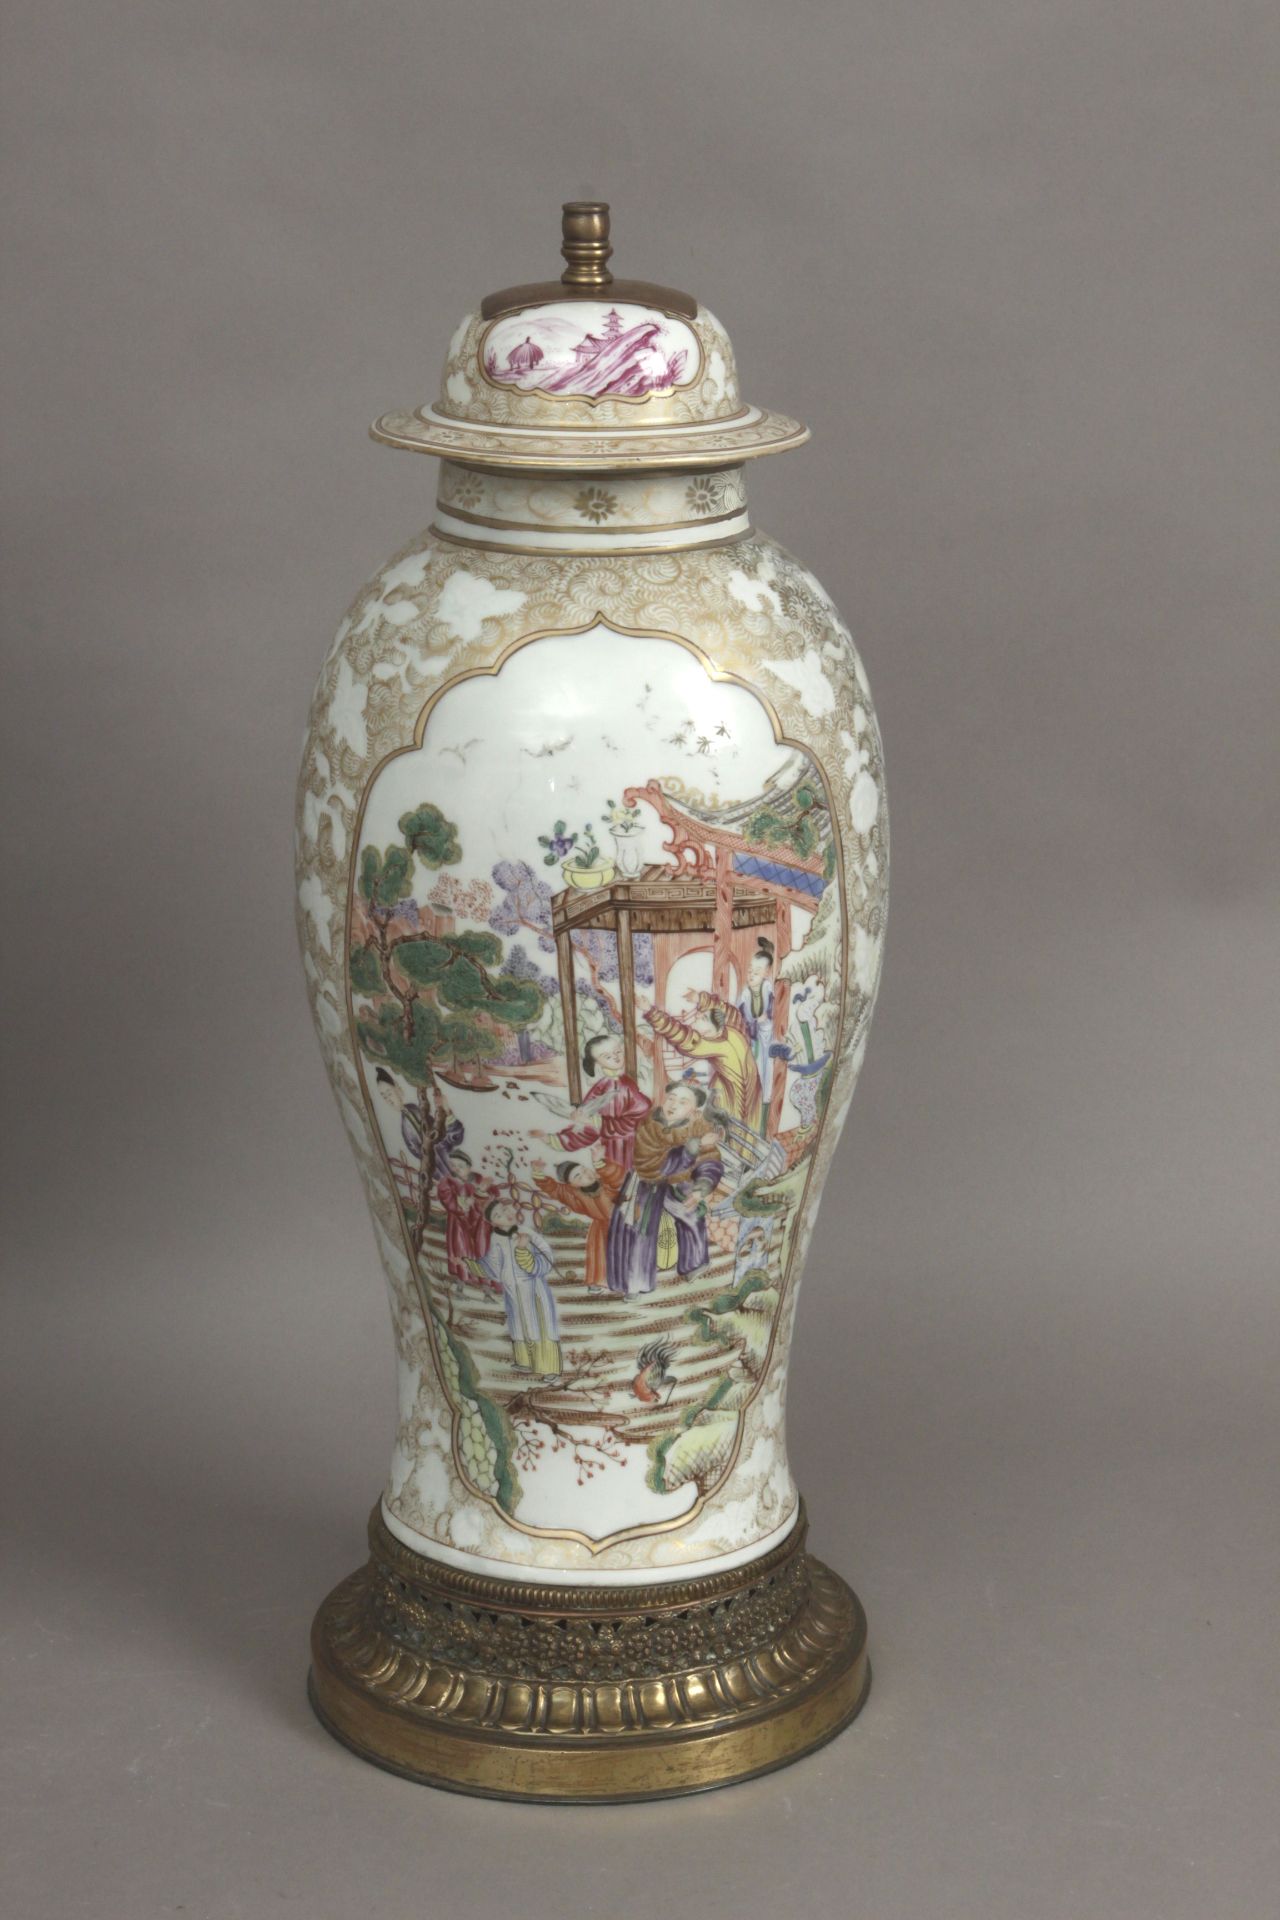 A Chinese porcelain vase possibly from 18th century